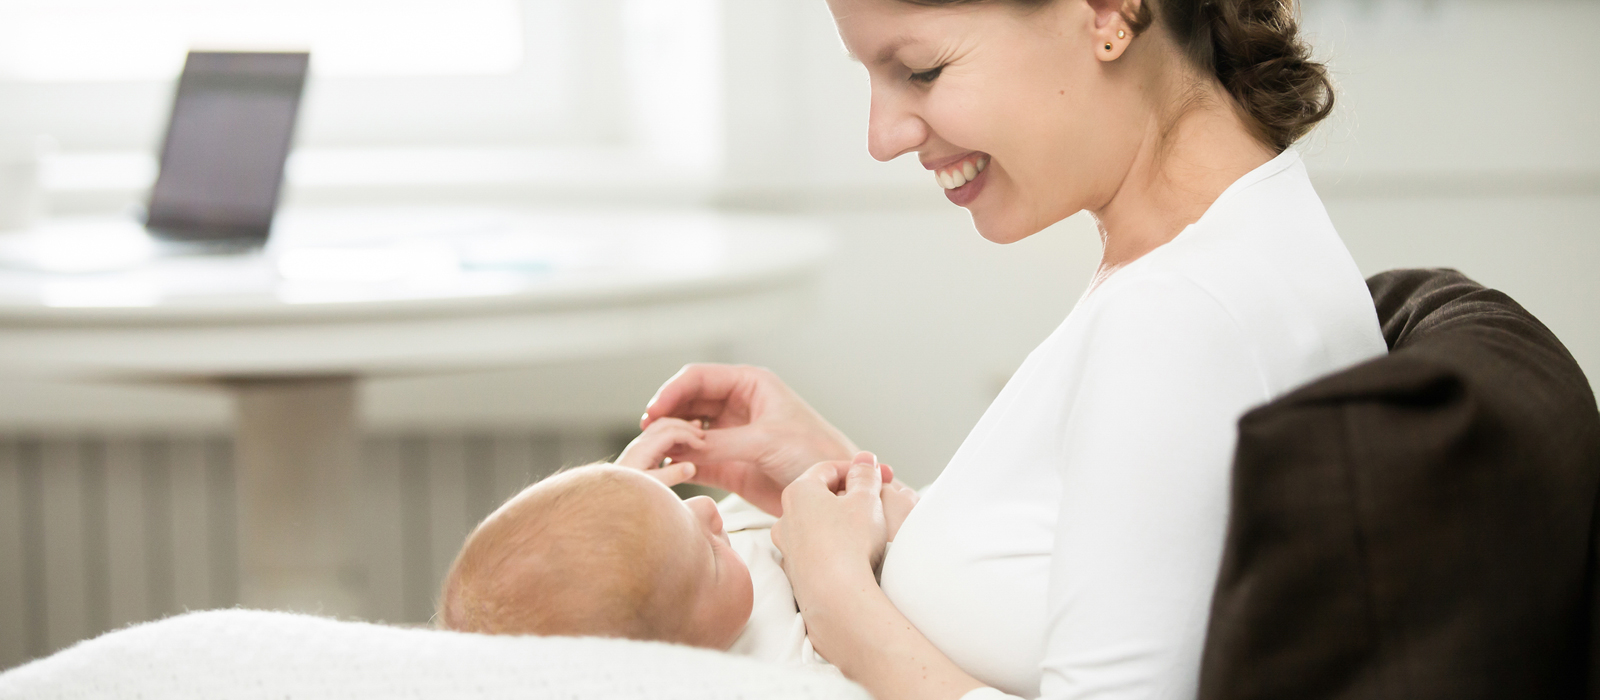 9 Breastfeeding Products To Add Into Your Checklist